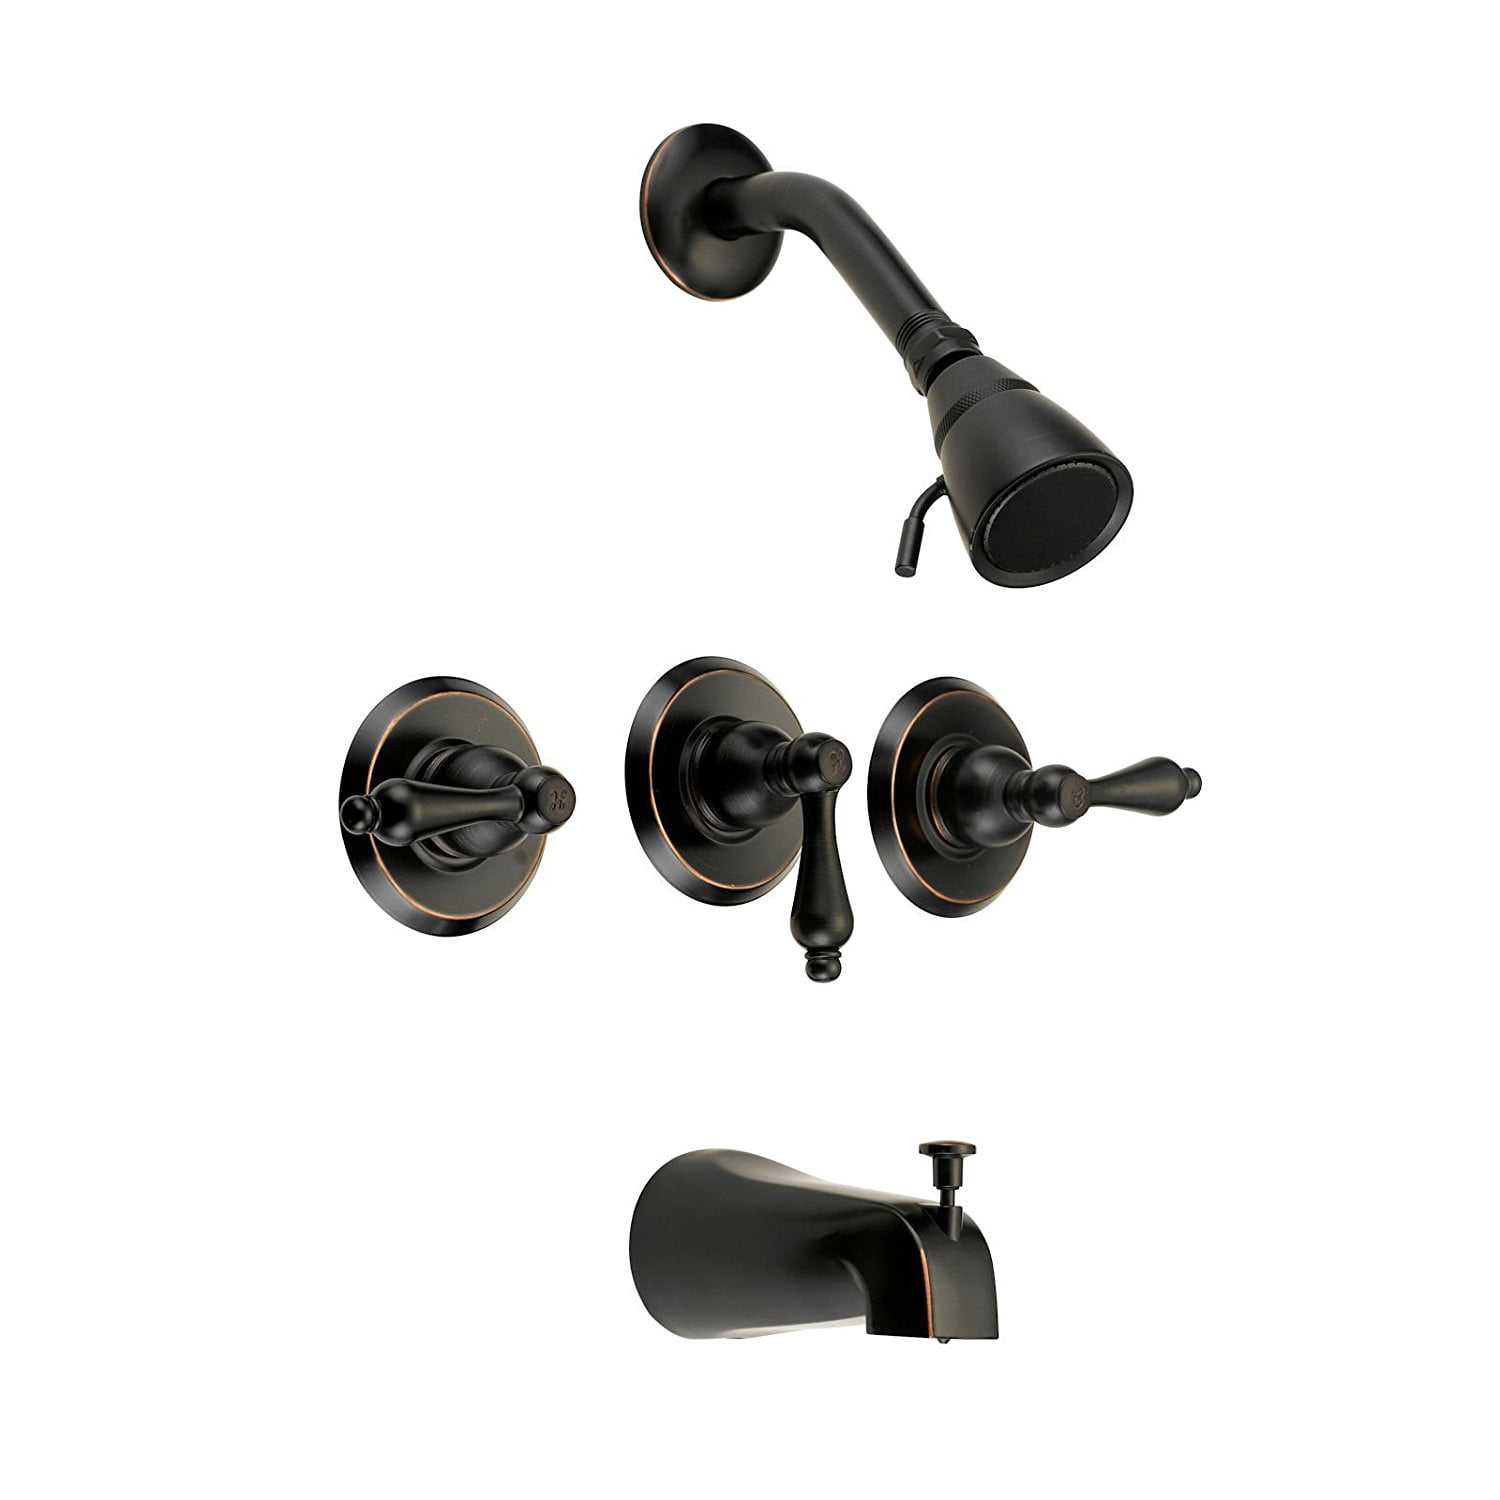 Designers Impressions Oil Rubbed Bronze 2 Handle Tub/Shower Combo Faucet  656727 